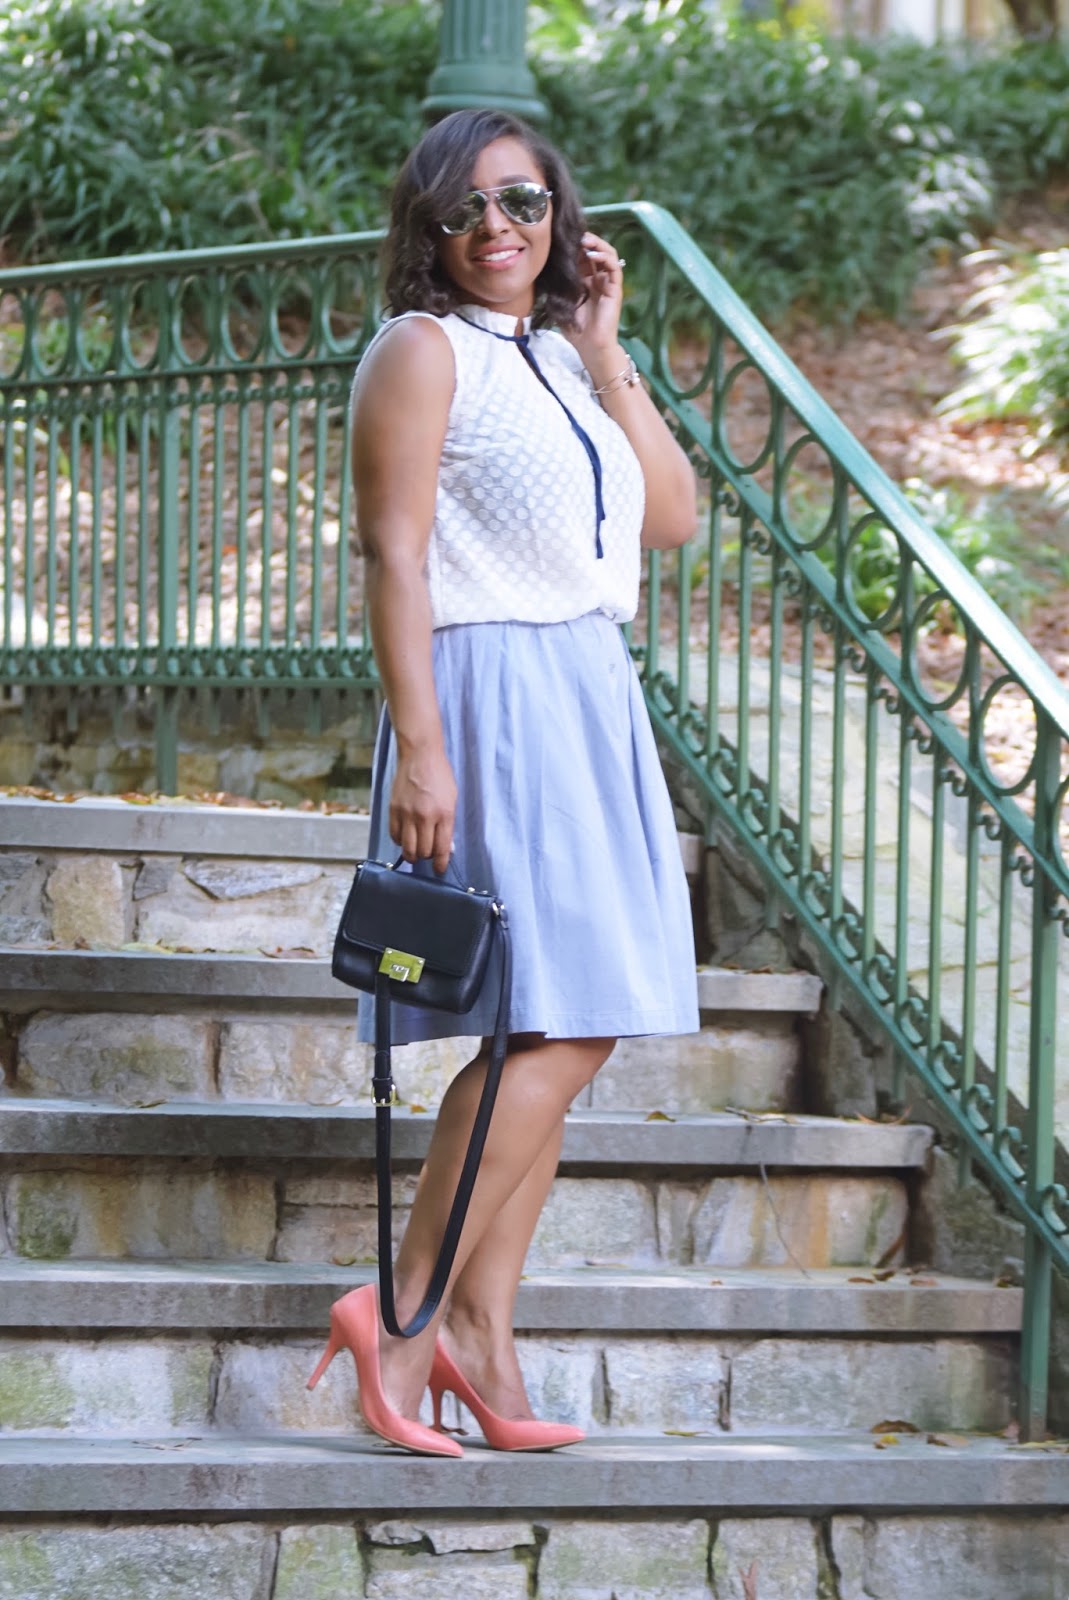 Modcloth, Modclothsquad, prefall, full skirt, midi skirt, armandhugon, dominican bloggers, dc bloggers, streetstyle, fall outfit ideas, necktie blouse